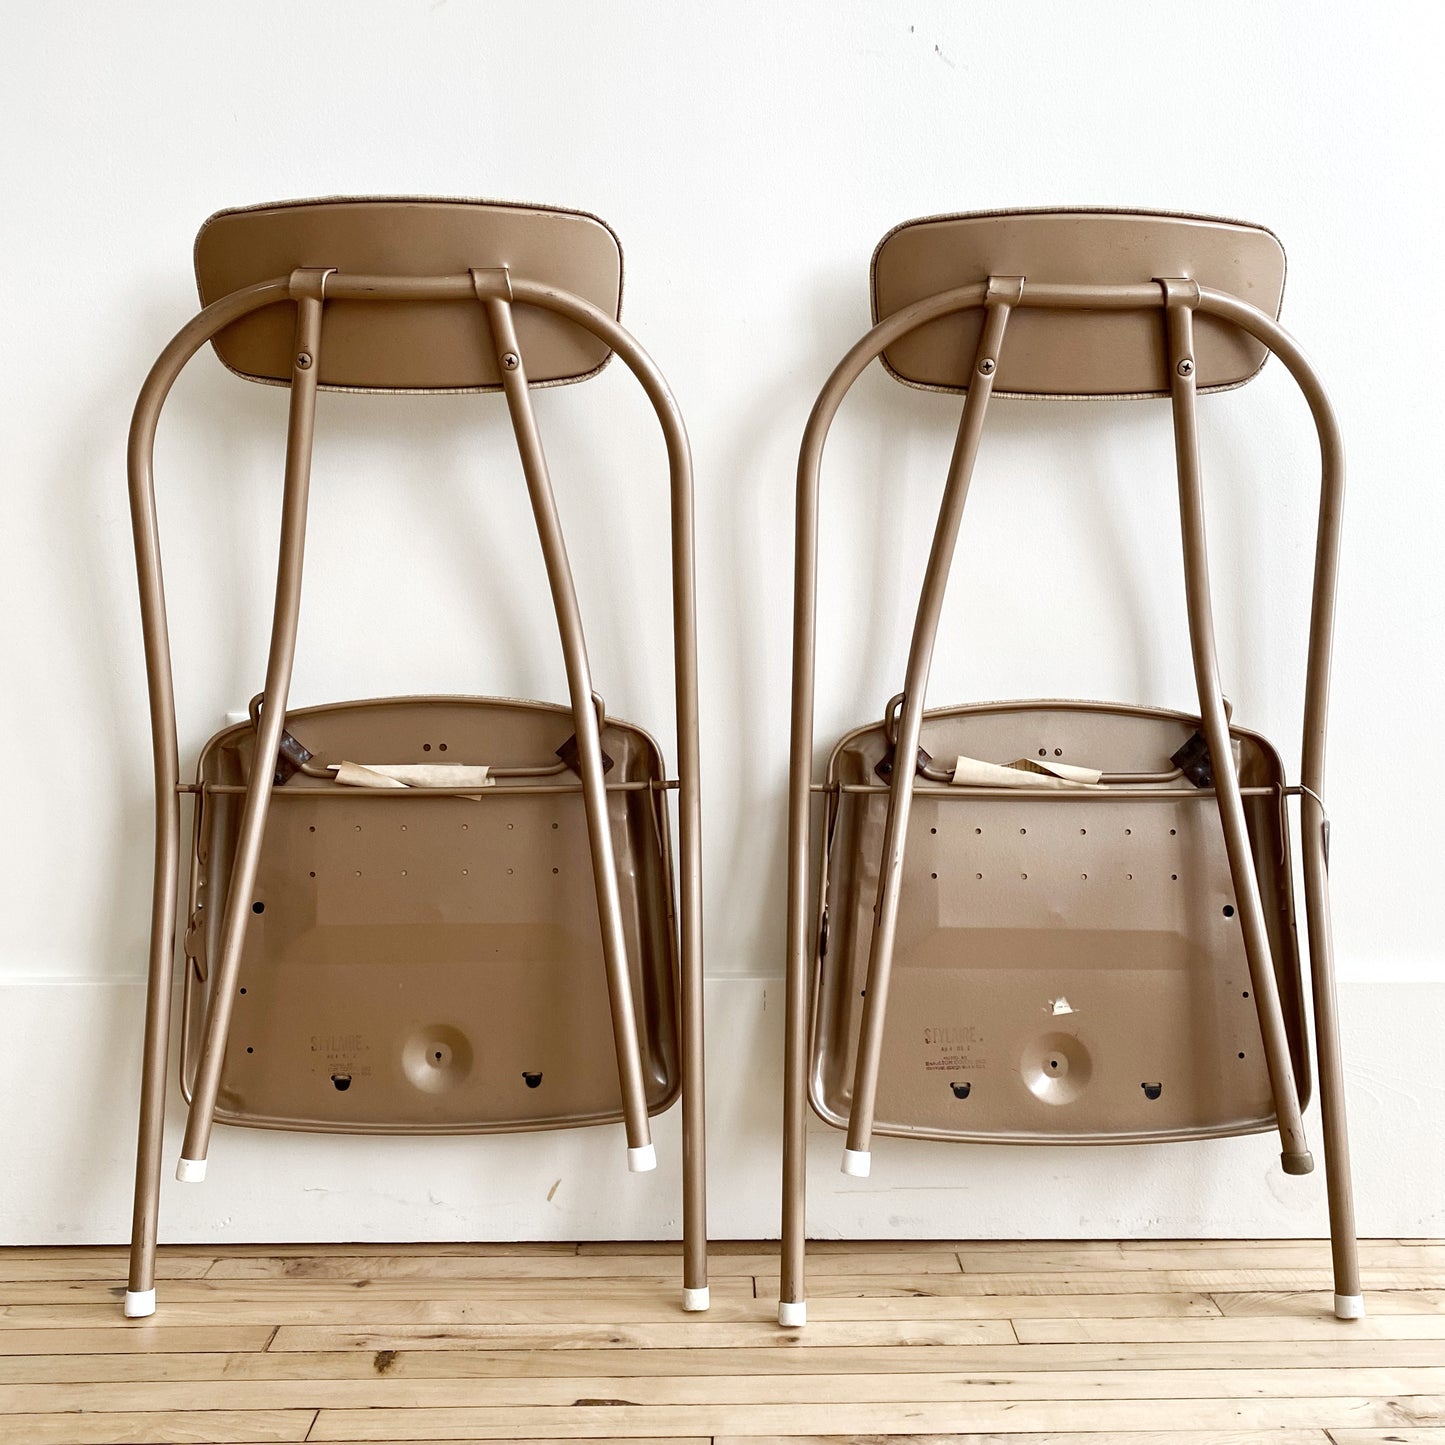 Pair of Vintage Mid-century Folding Chairs